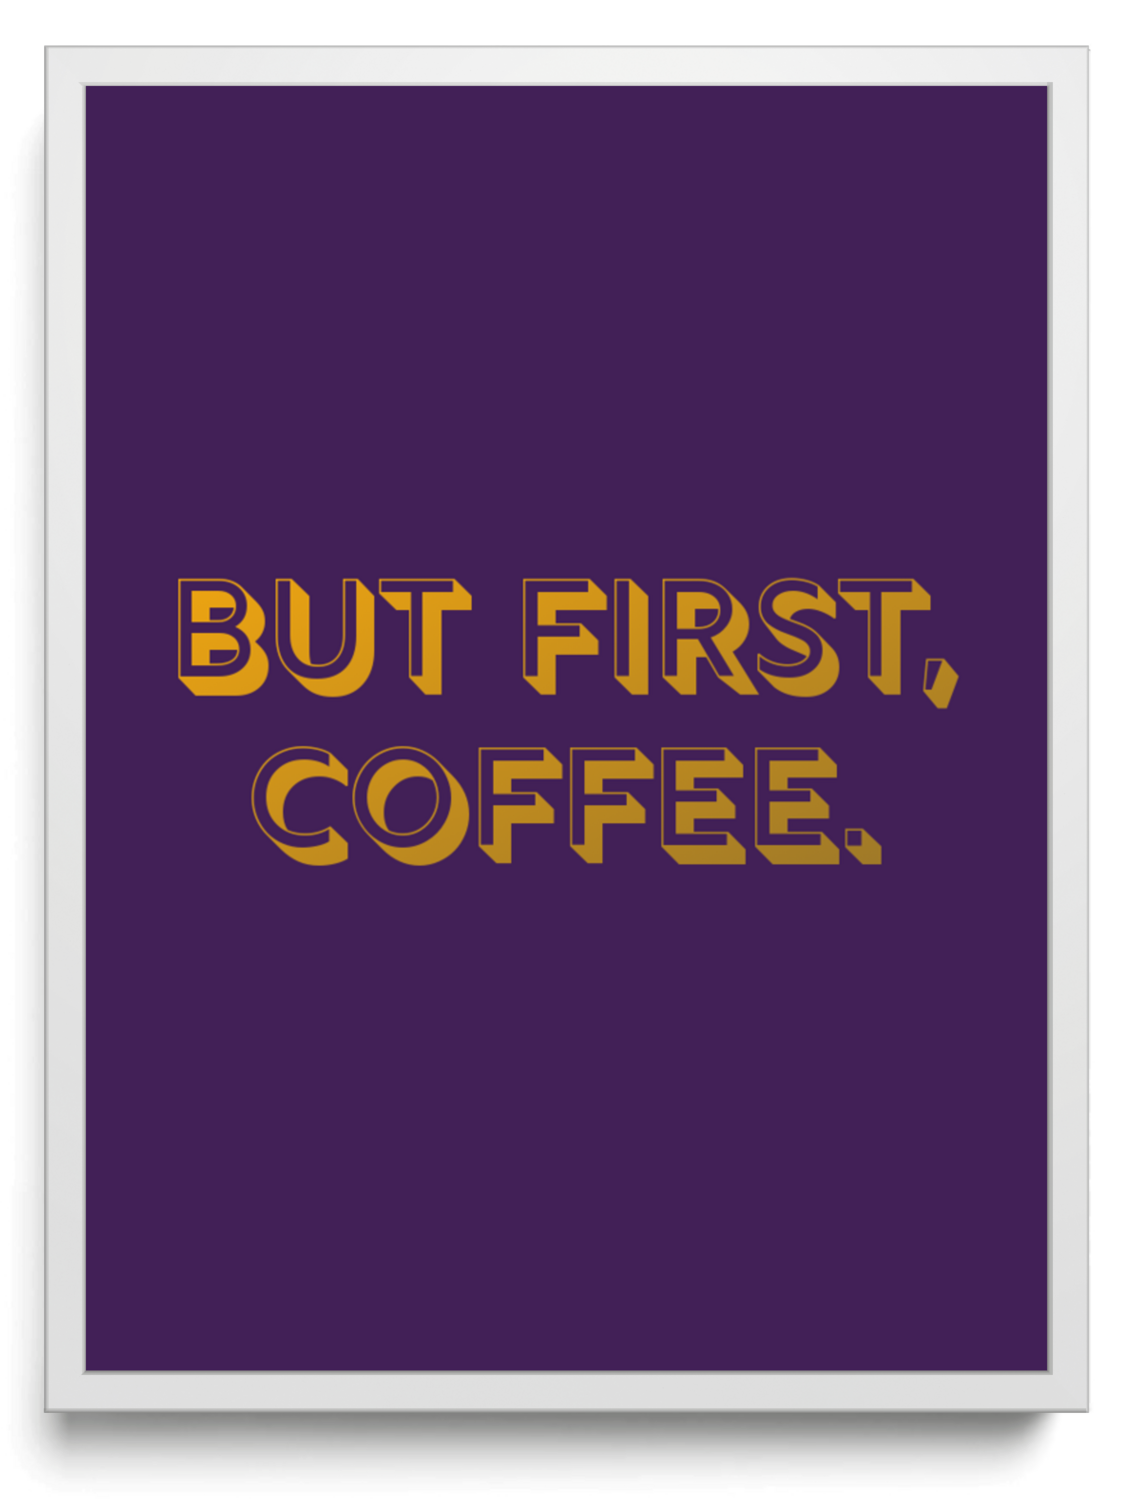 But first coffee framed typographic print